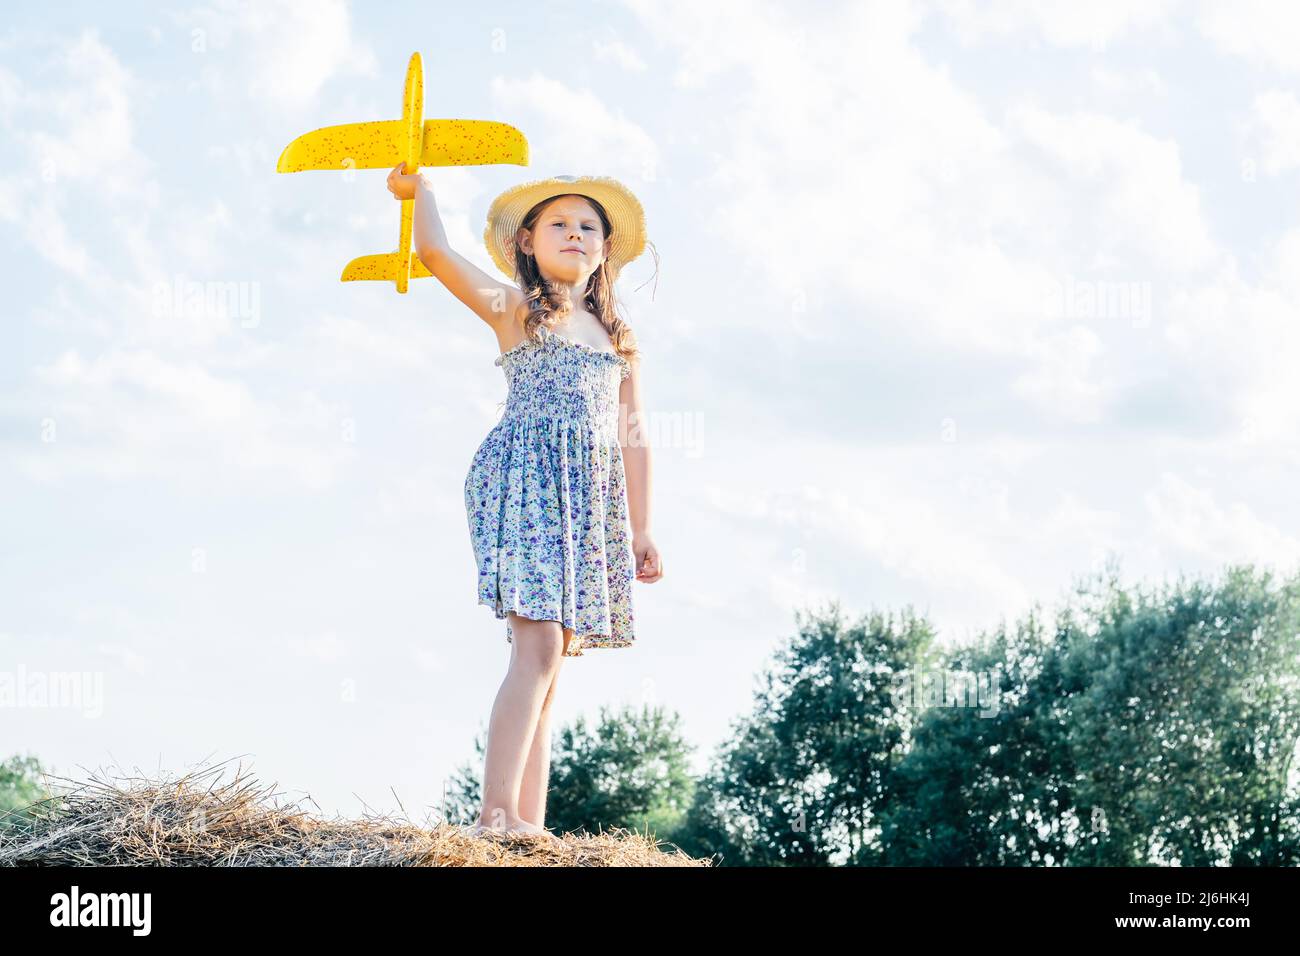 Portrait of little girl in hat and dress playing flying yellow toy airplane, standing on haystack. Taking aim in sky. Light sunny day. Having Stock Photo